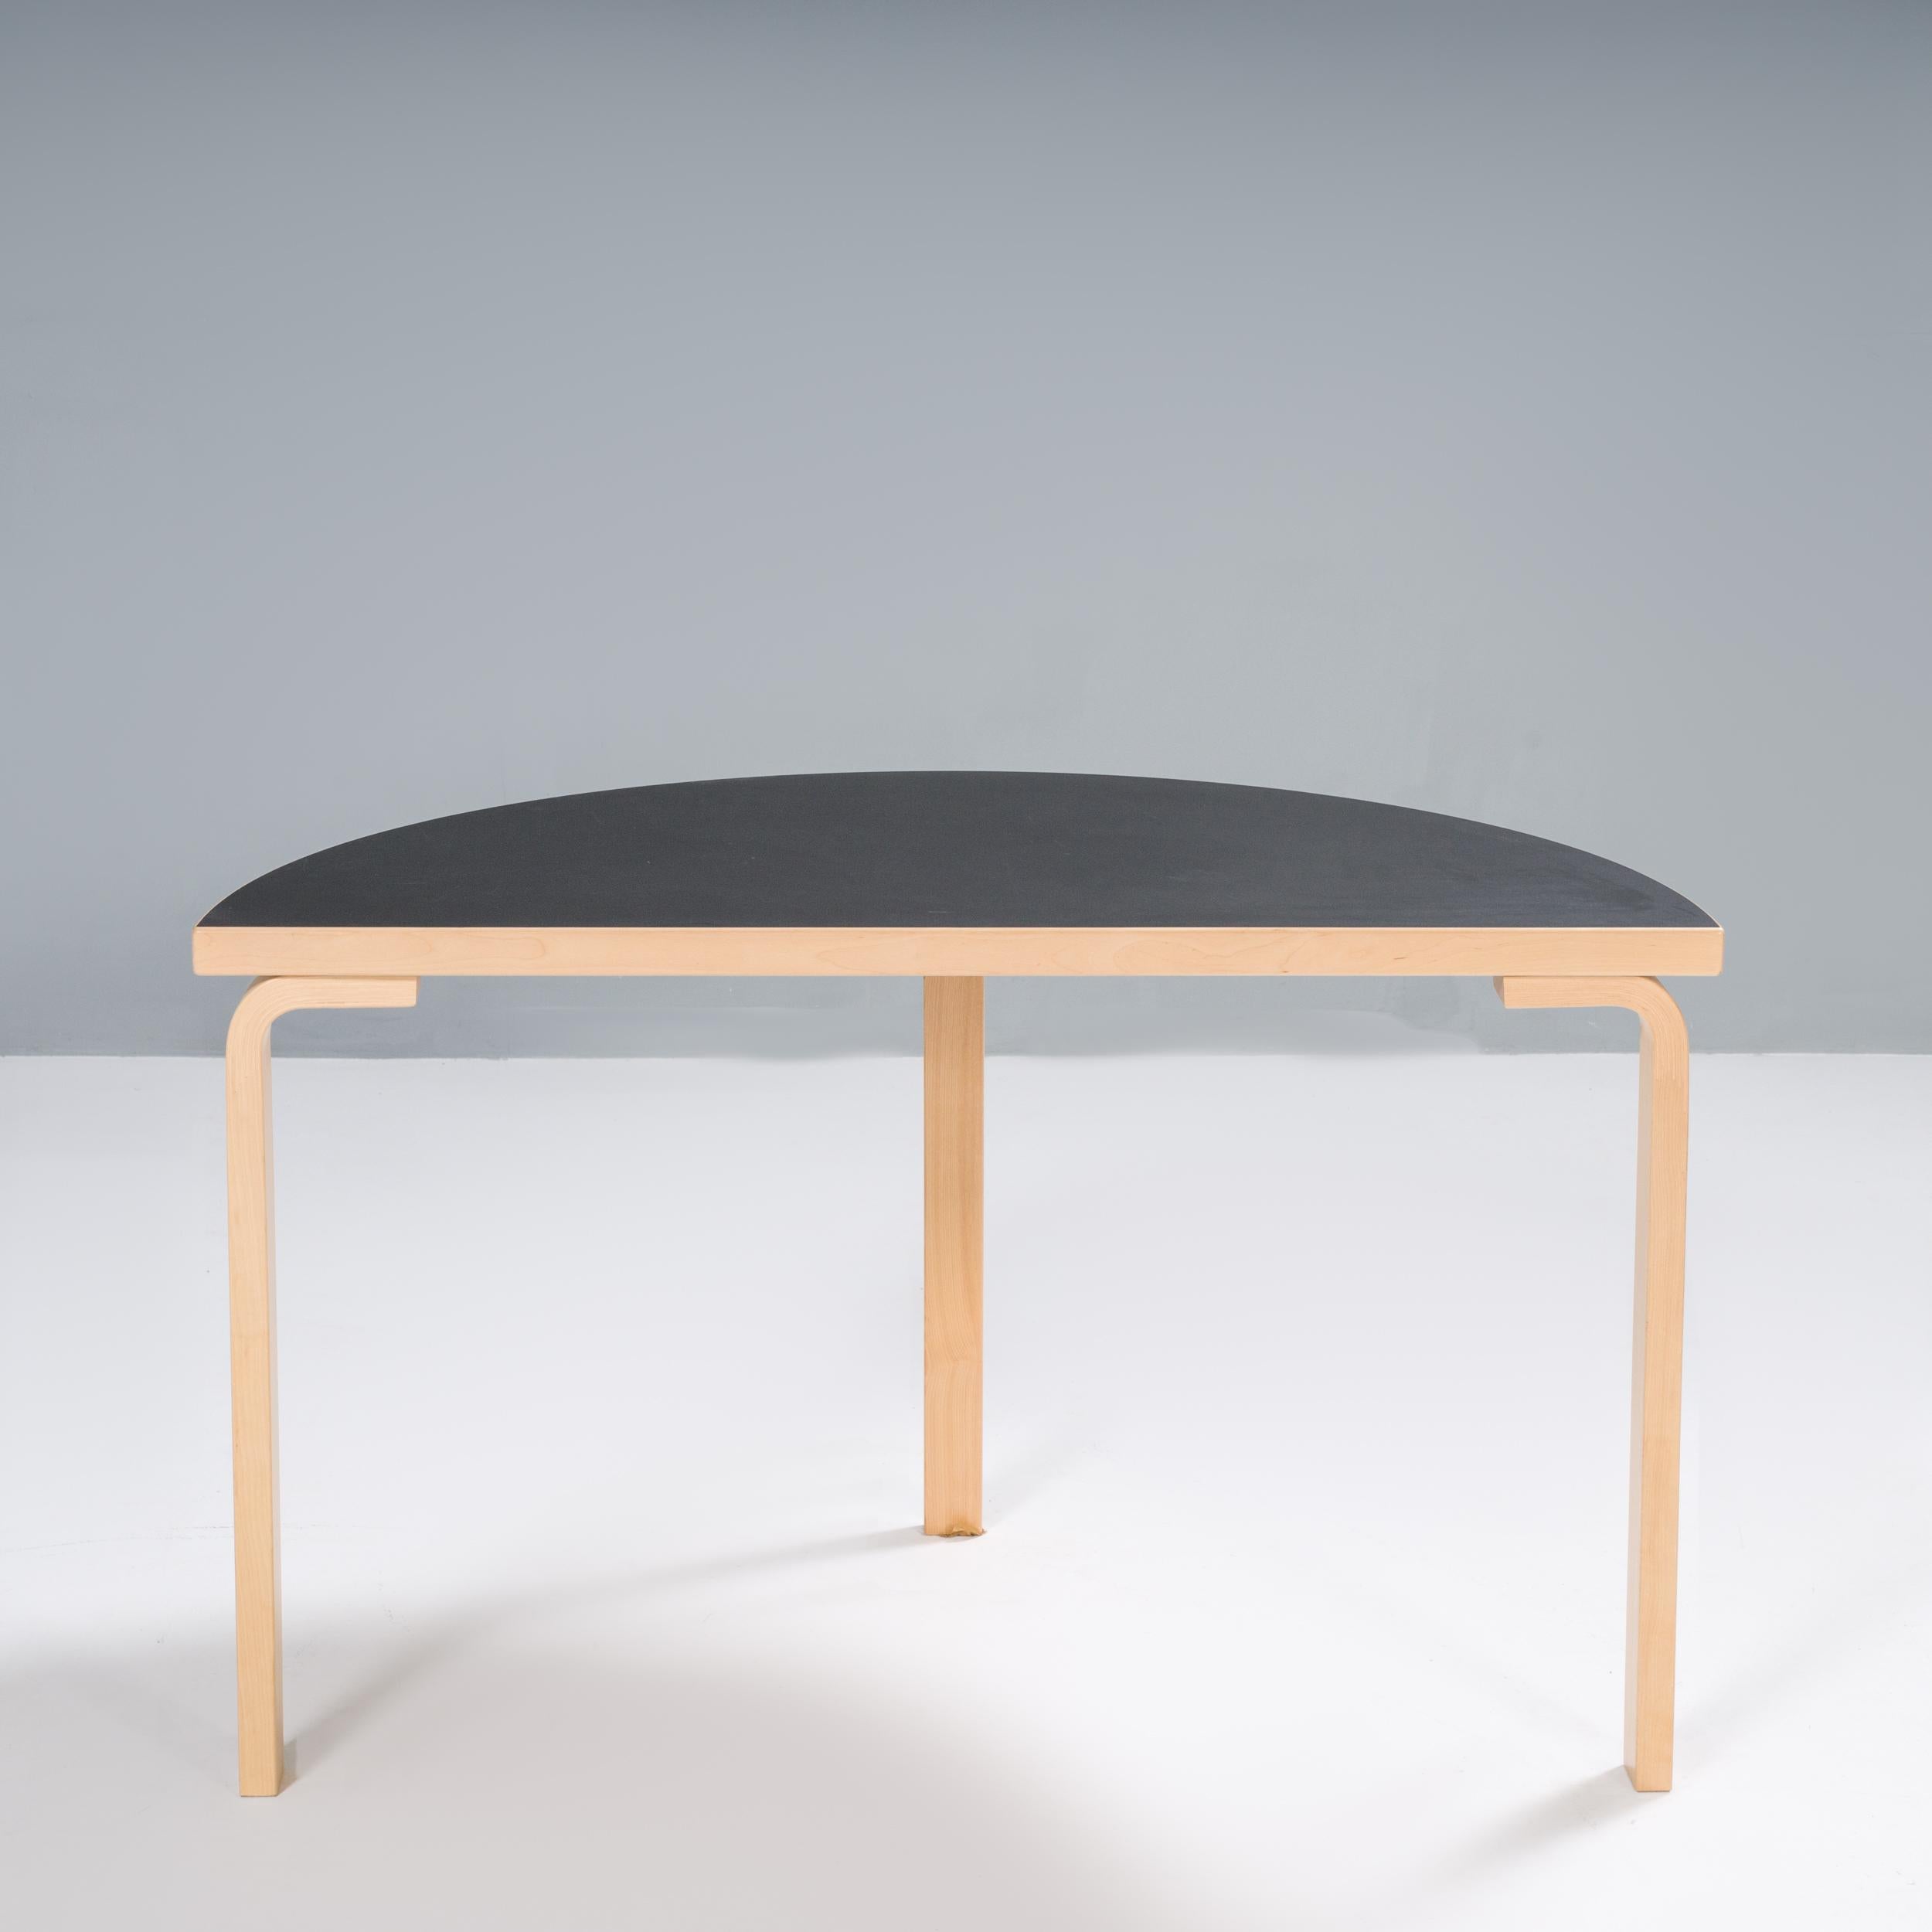 Originally designed by Alvar Aalto in 1933, this half-round table formed part of his iconic L-leg collection.

Aalto created the collection after experimenting with bending wood in the early 1920s, before patenting his technique in 1933.

The